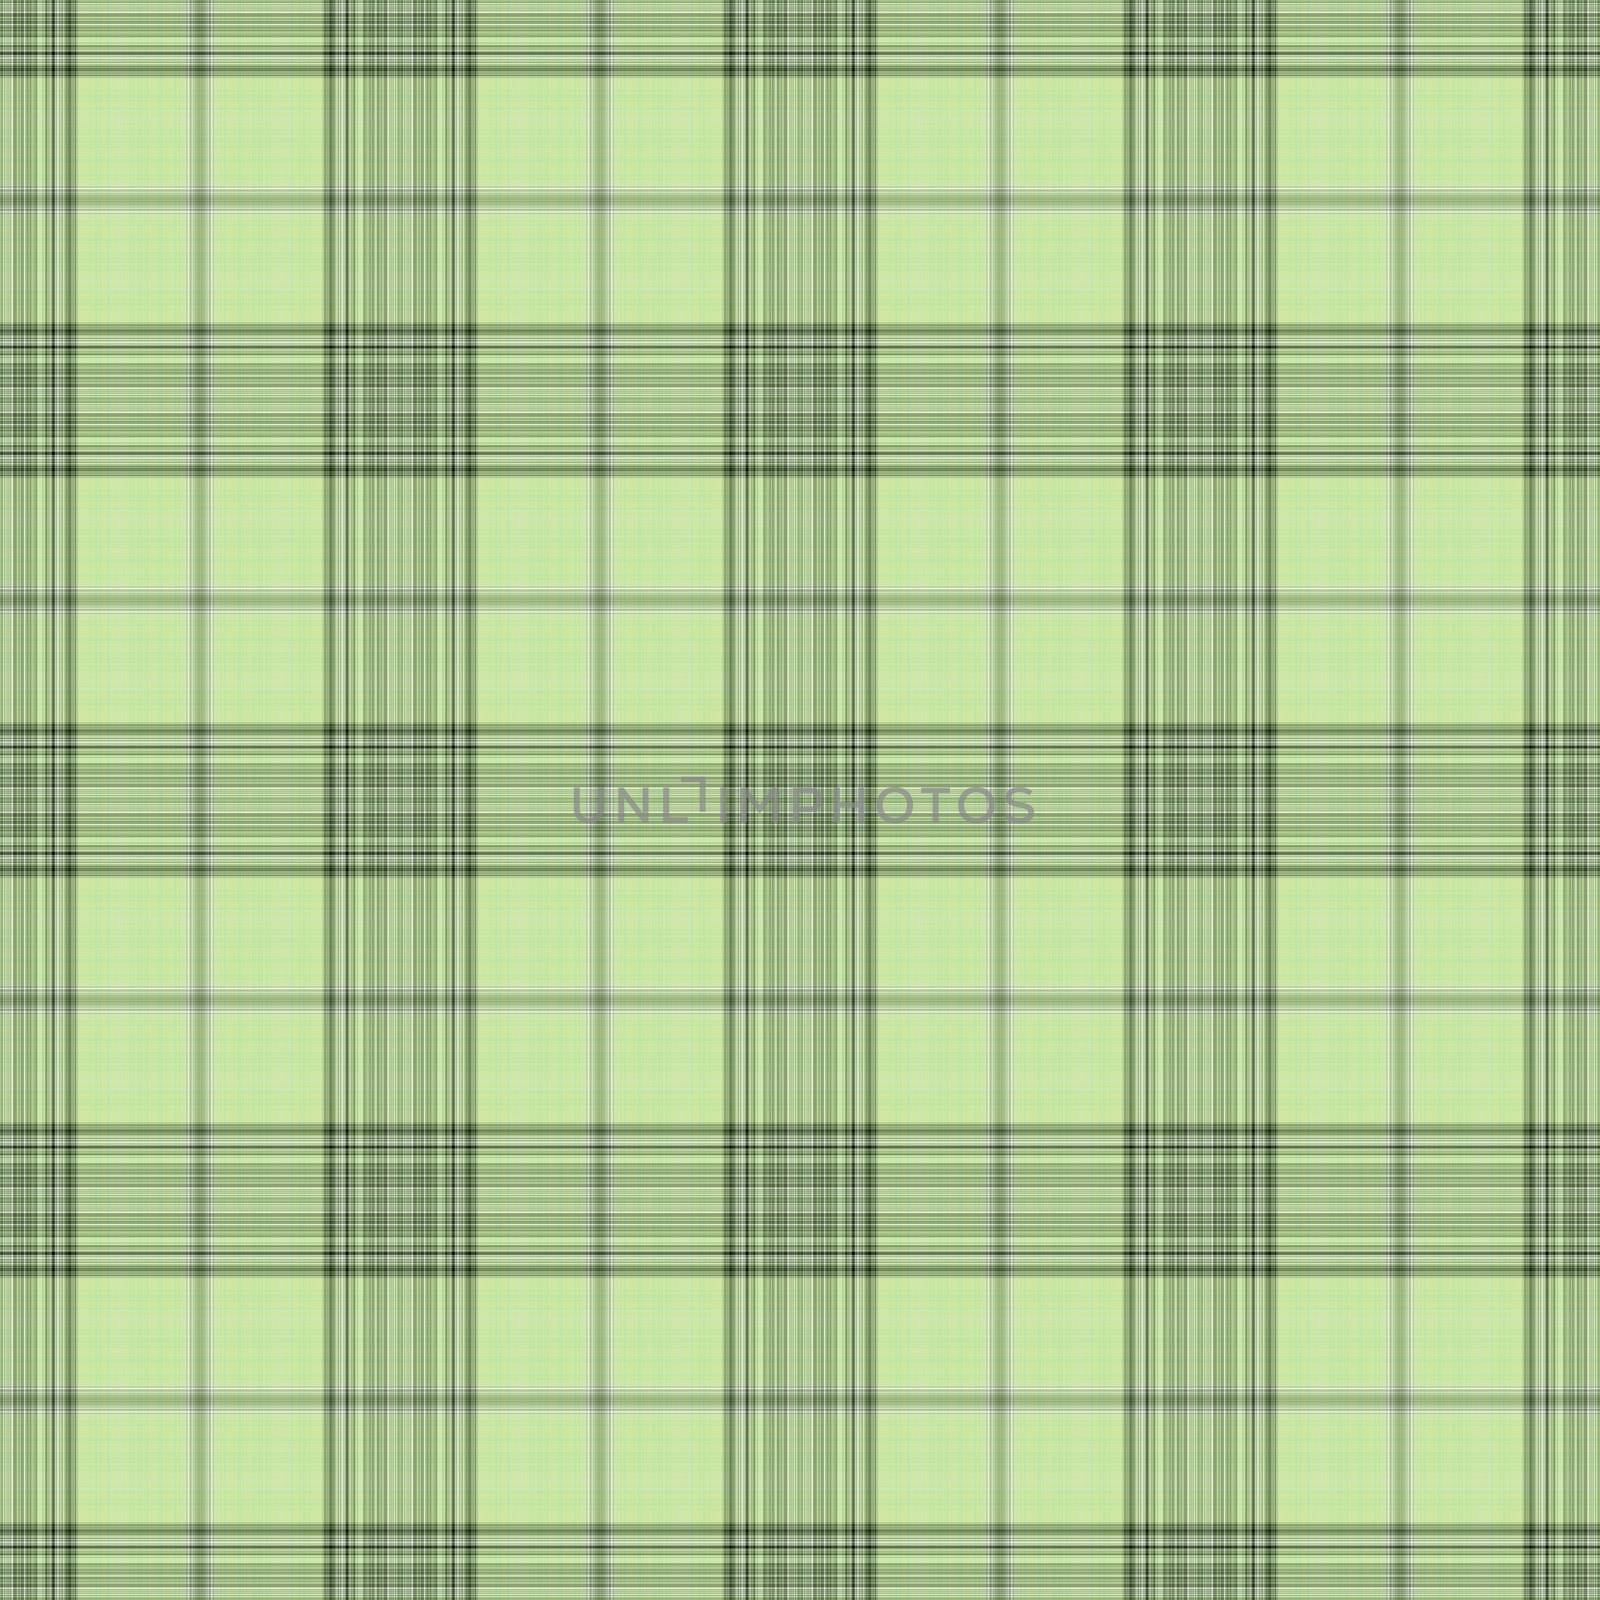 Soft plaid in shades of green